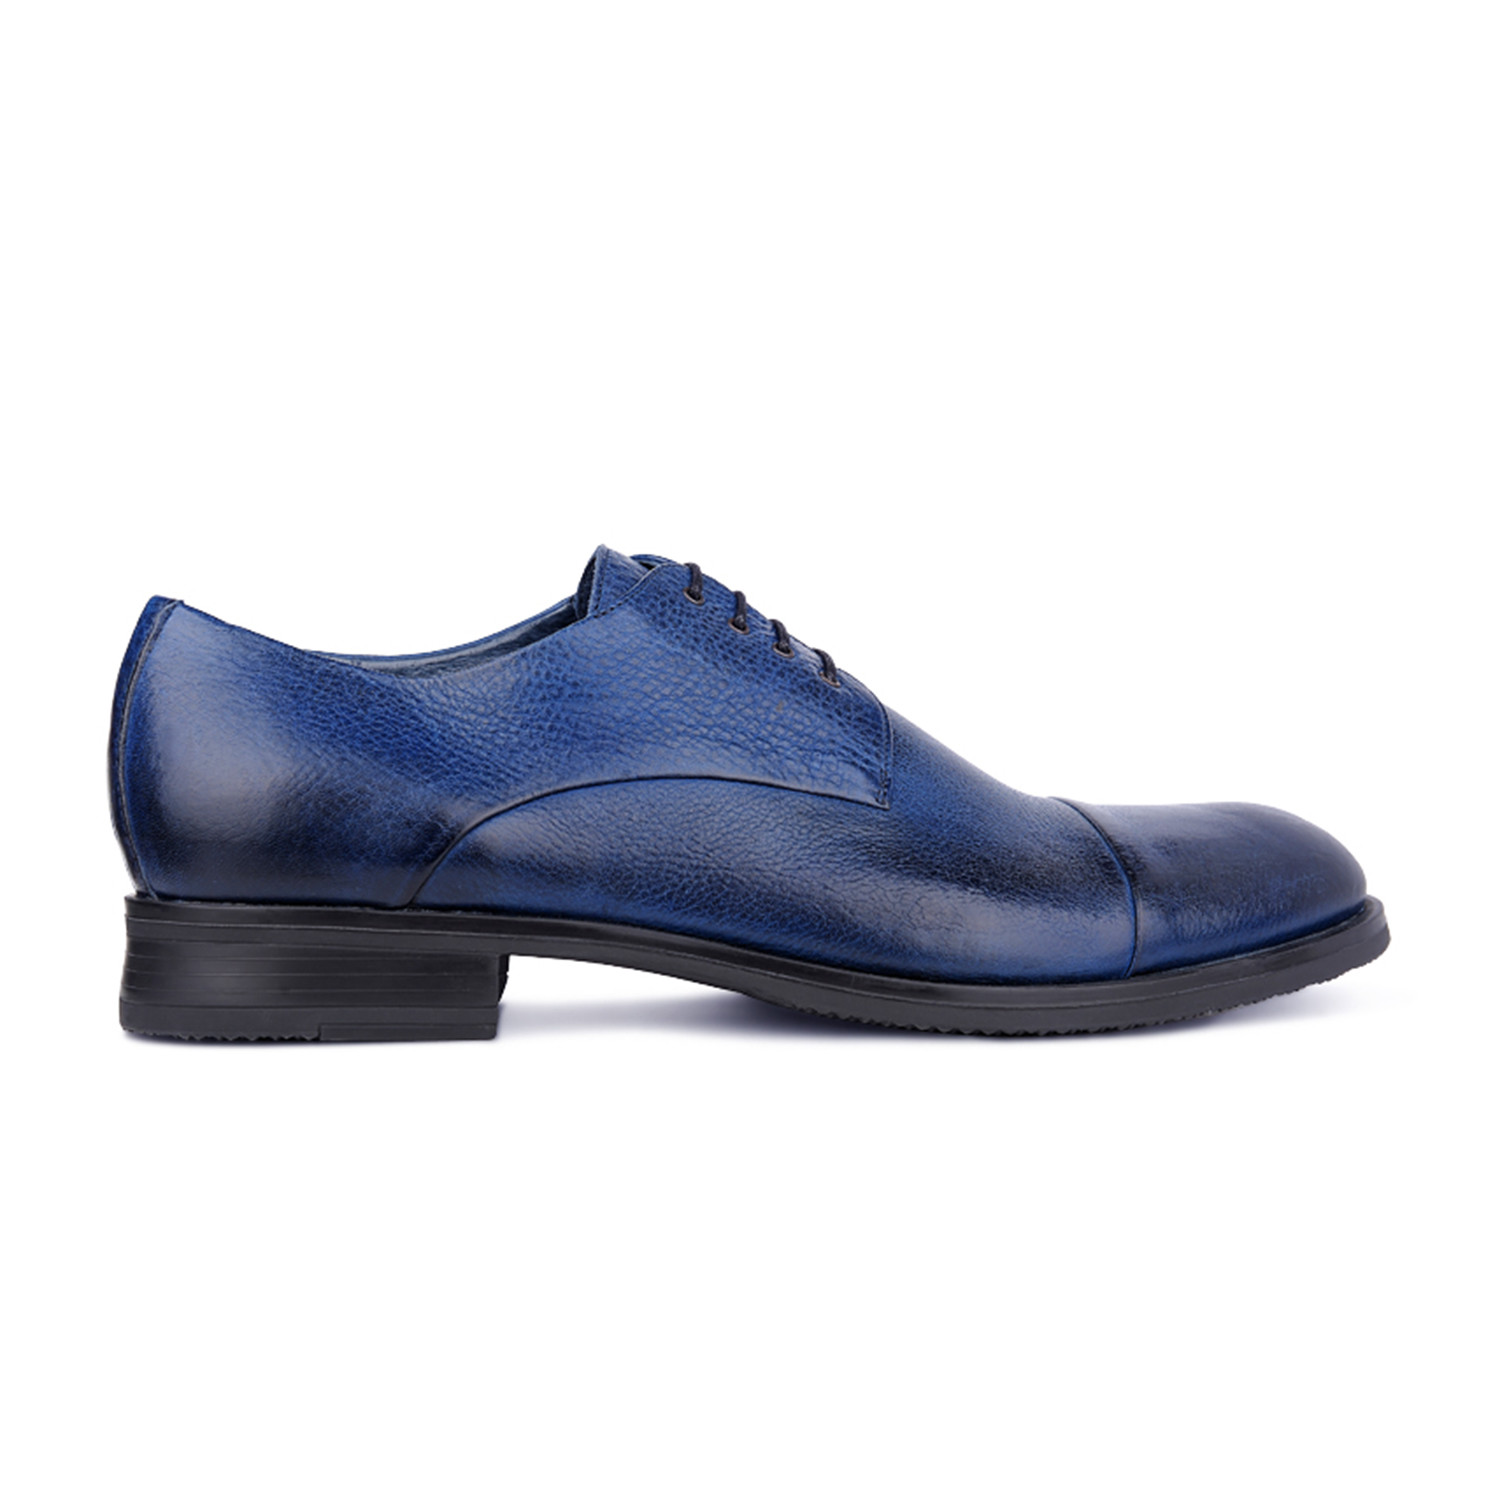 Cap-Toe Oxford // Navy Blue (Euro: 40) - Gino Rossi - Touch of Modern